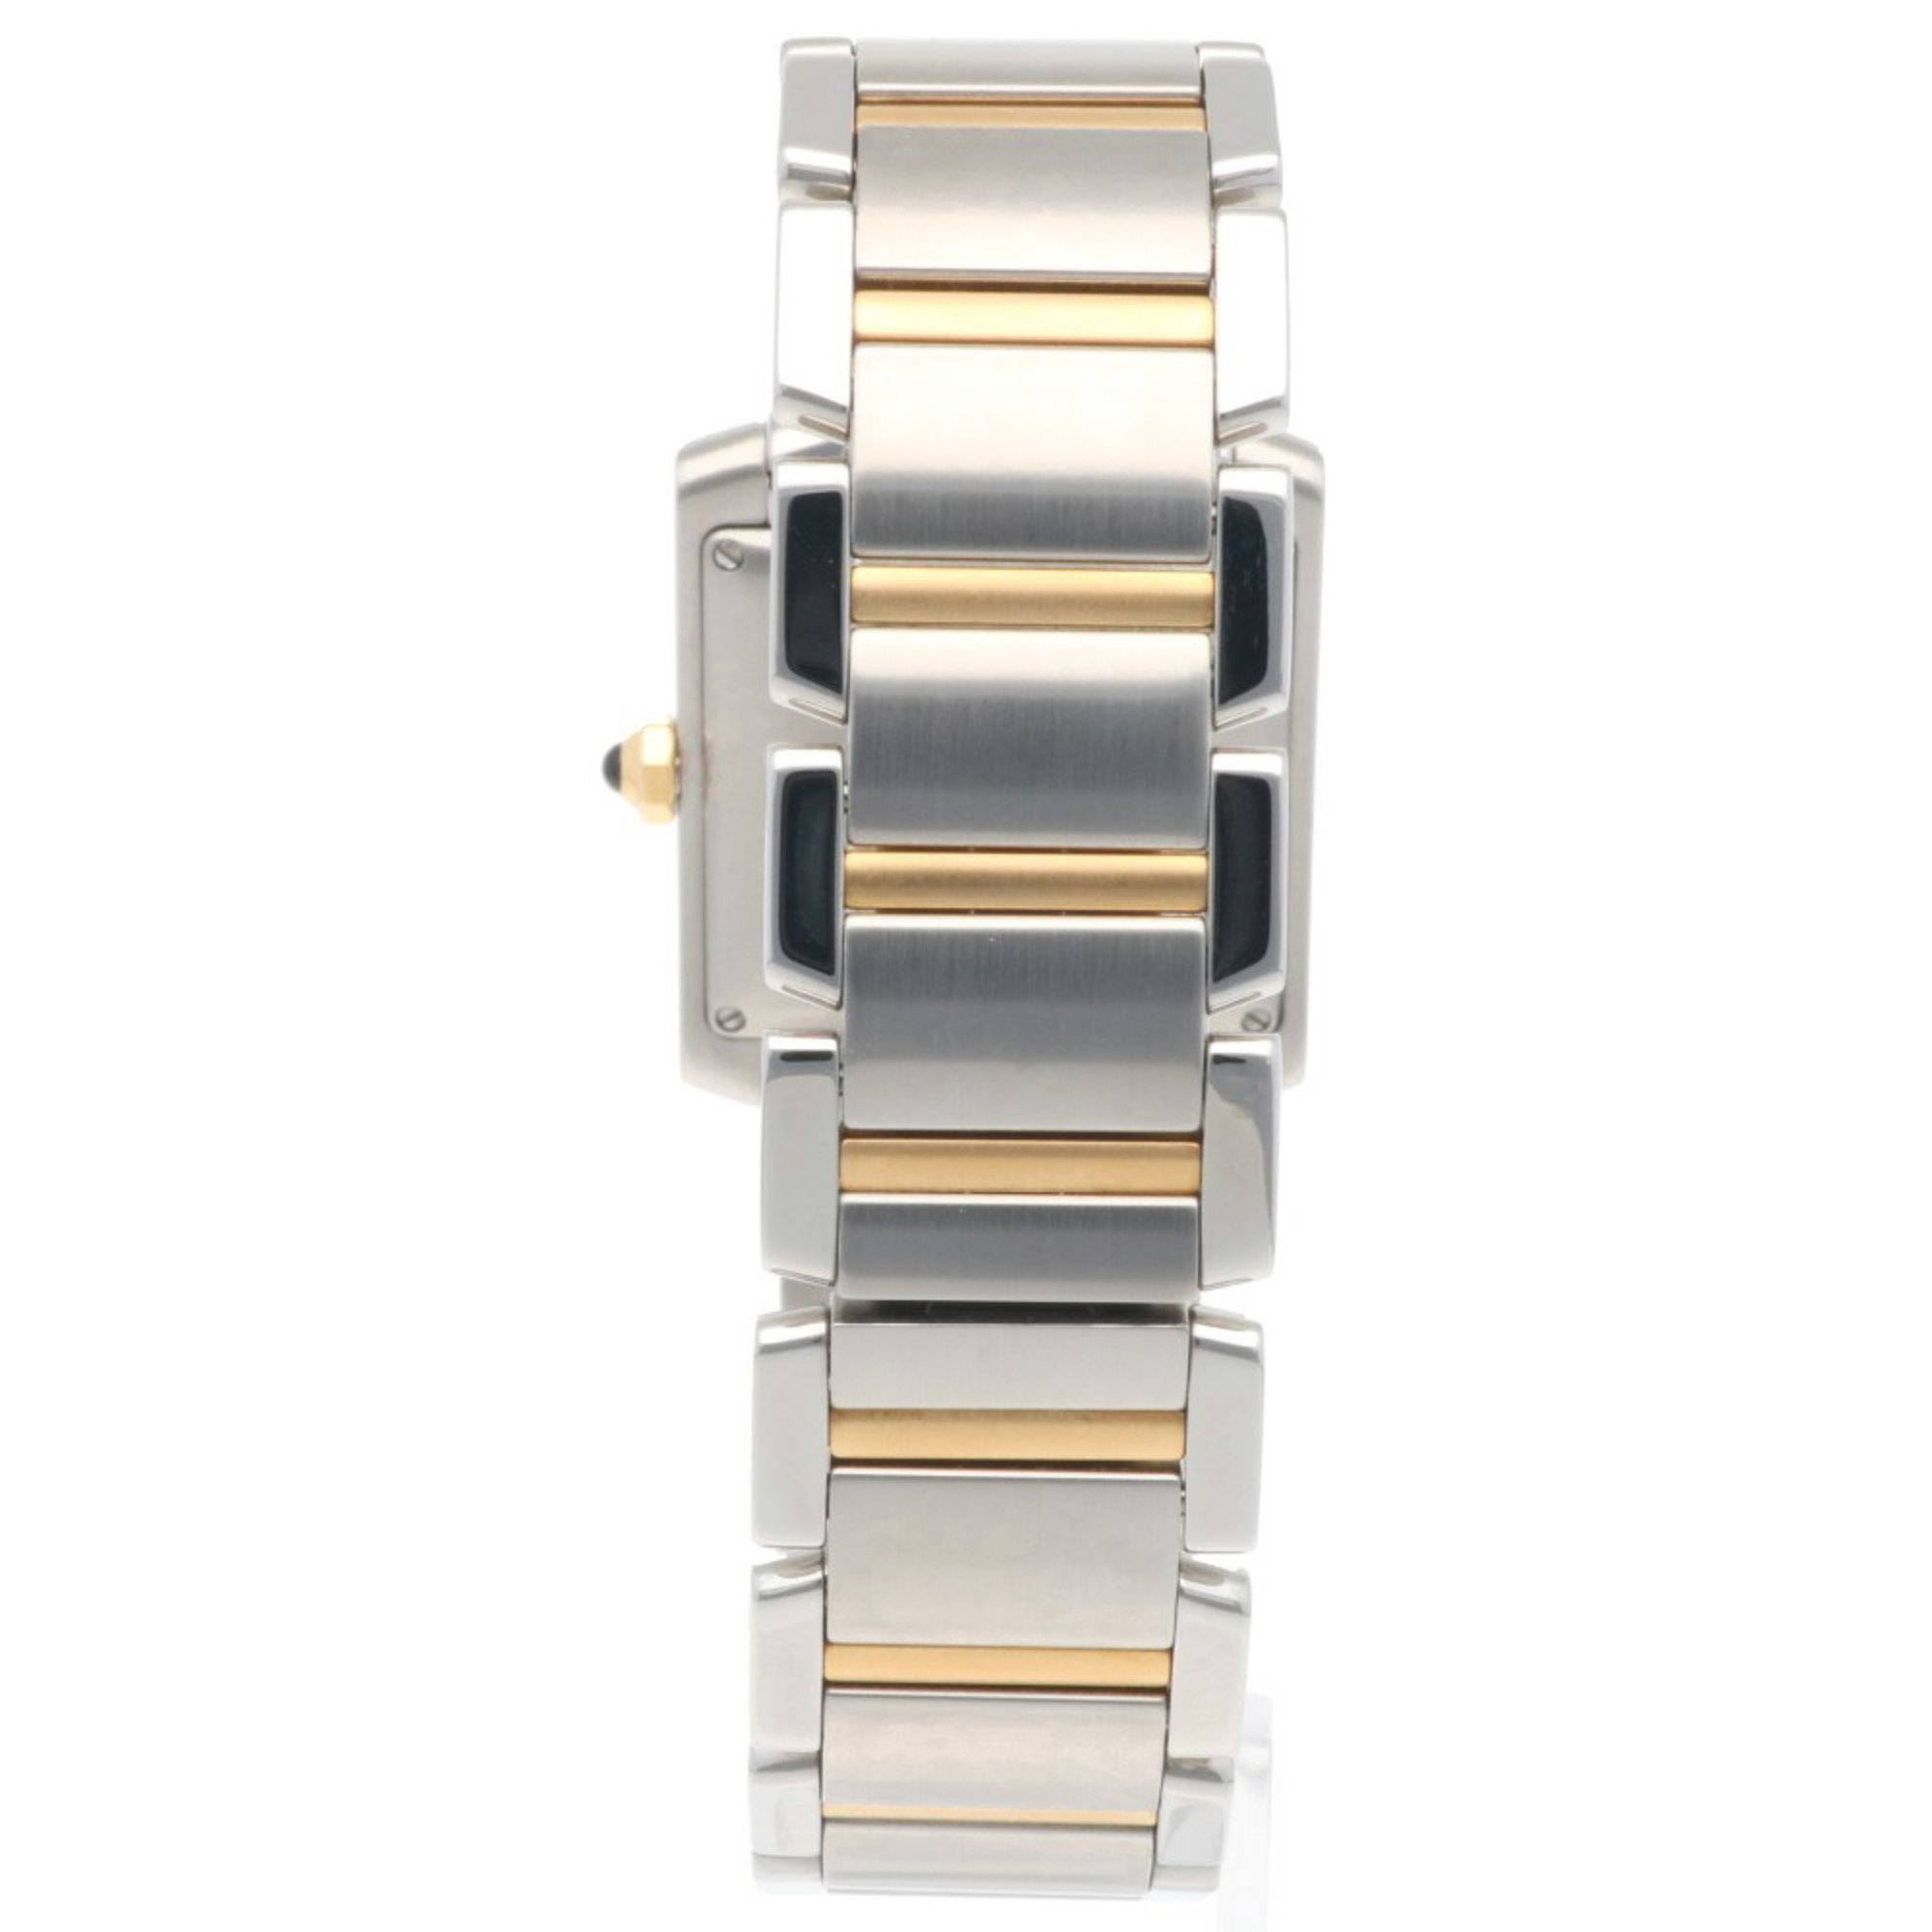 Cartier Tank Francaise LM Watch, Stainless Steel 2302 Automatic, Men's, Overhauled